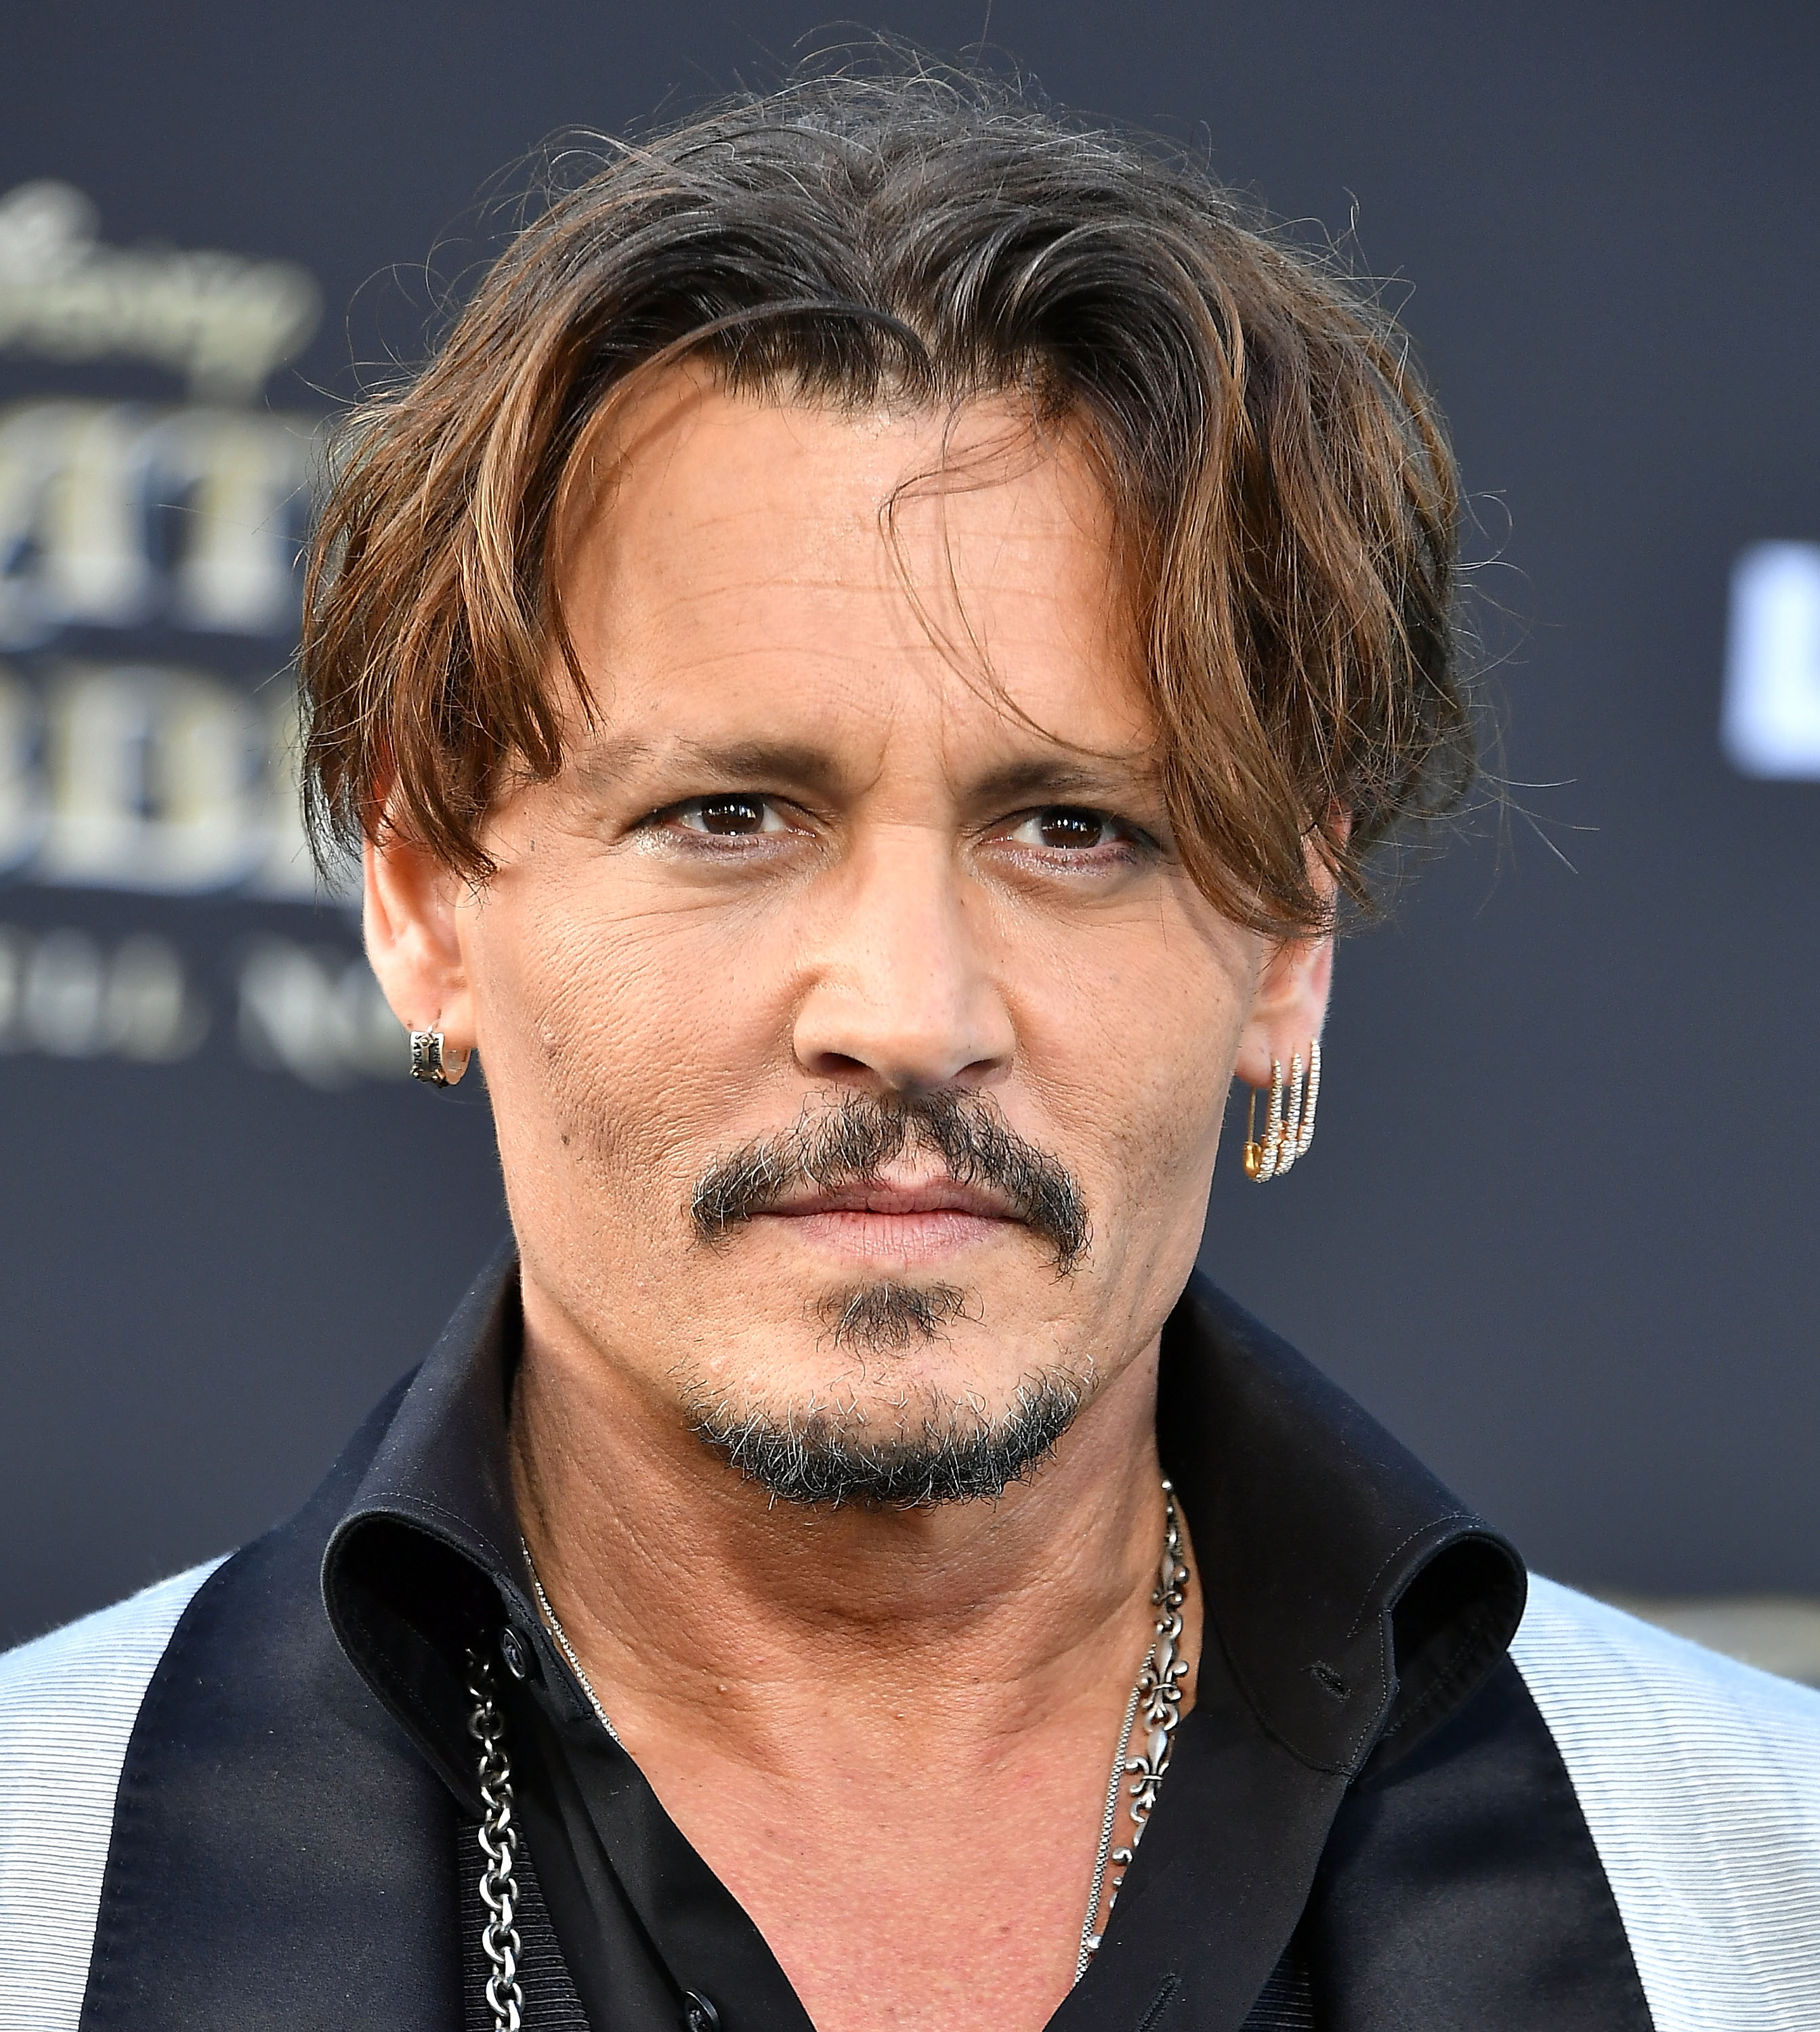 Johnny Depp's Rarely Seen Son Called 'Handsome as His Dad' â Few Times ...